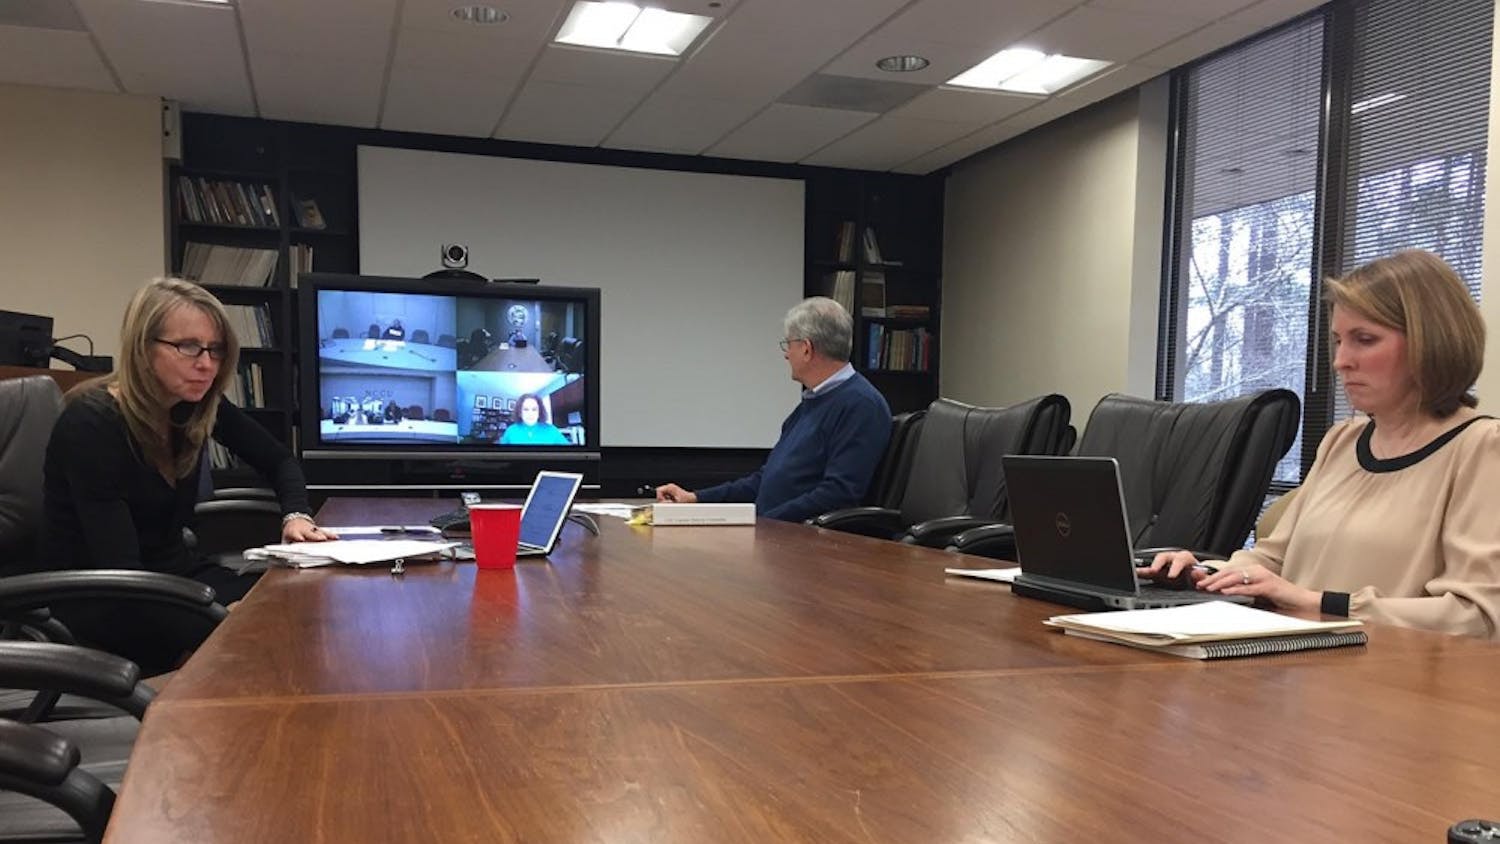 Jayne Grandes, Robert Joyce and Carrie Johnston (L-R) along with other subcommittee members discuss UNC system's policy on sexual harassment and sexual violence via teleconference. The subcommittee is part of the Board of Governor's Campus Security Committee.